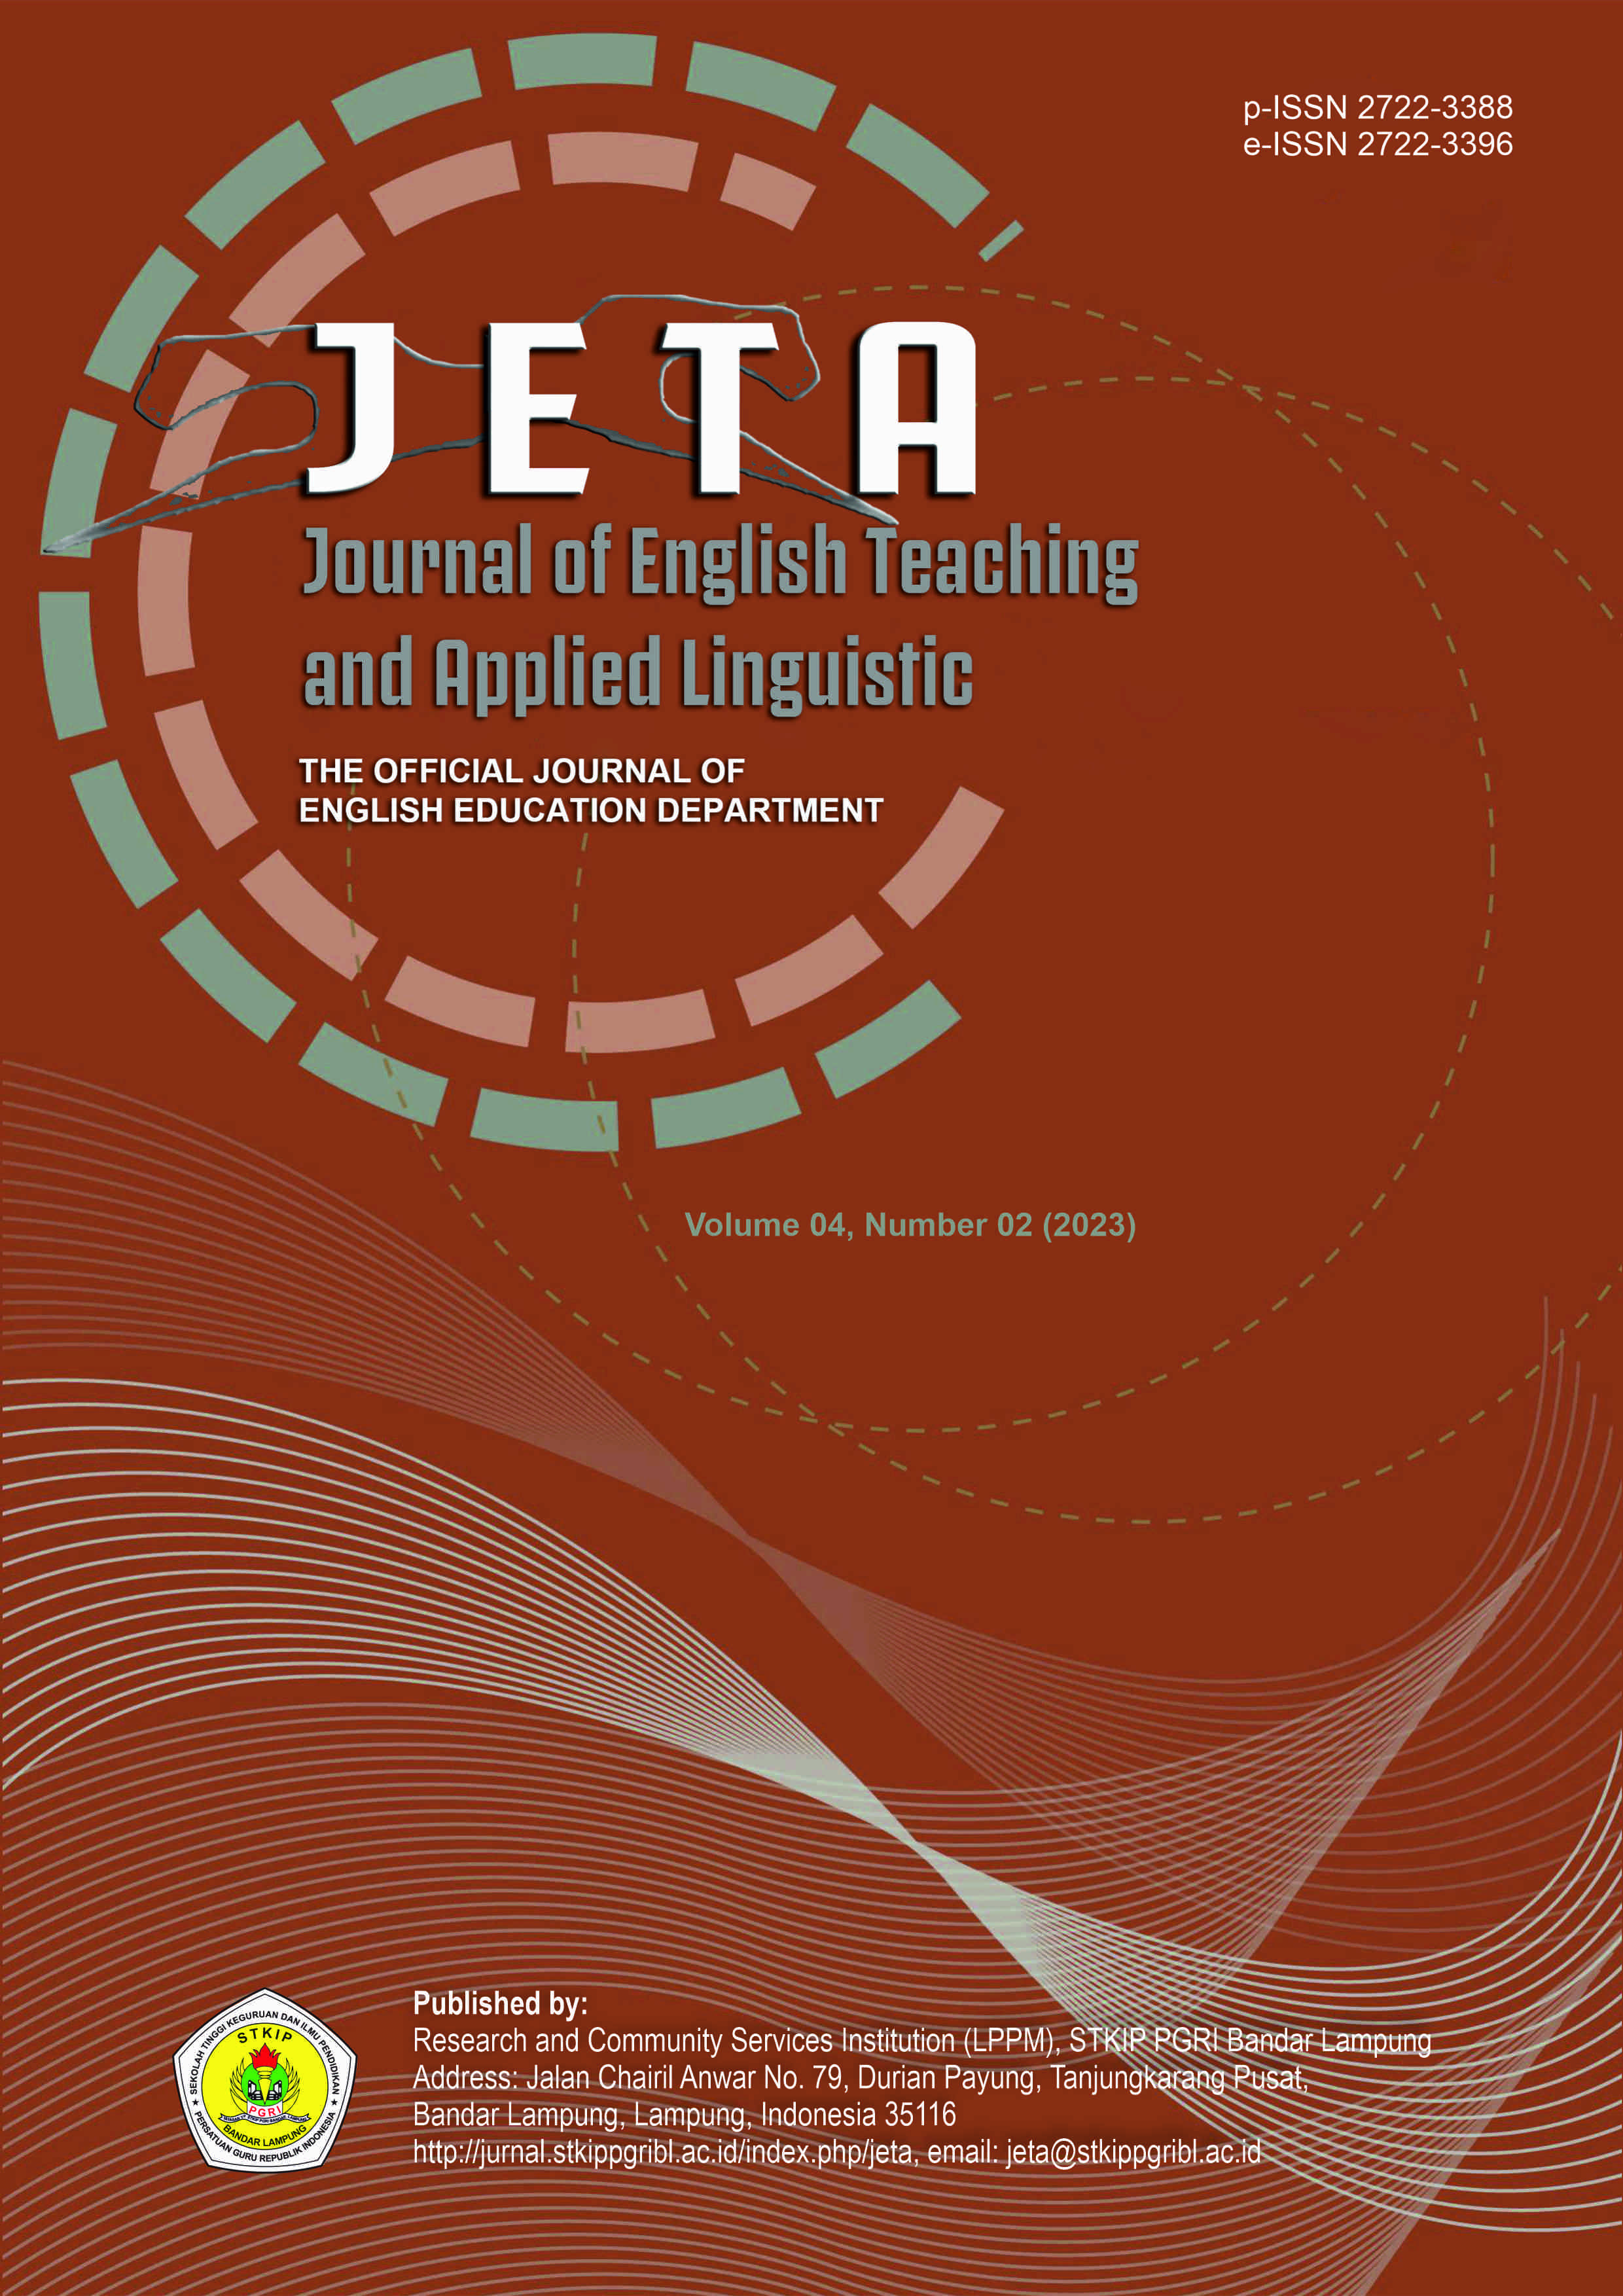 					View Vol. 4 No. 2 (2023): JETA: Journal of English Teaching and Applied Linguistic
				